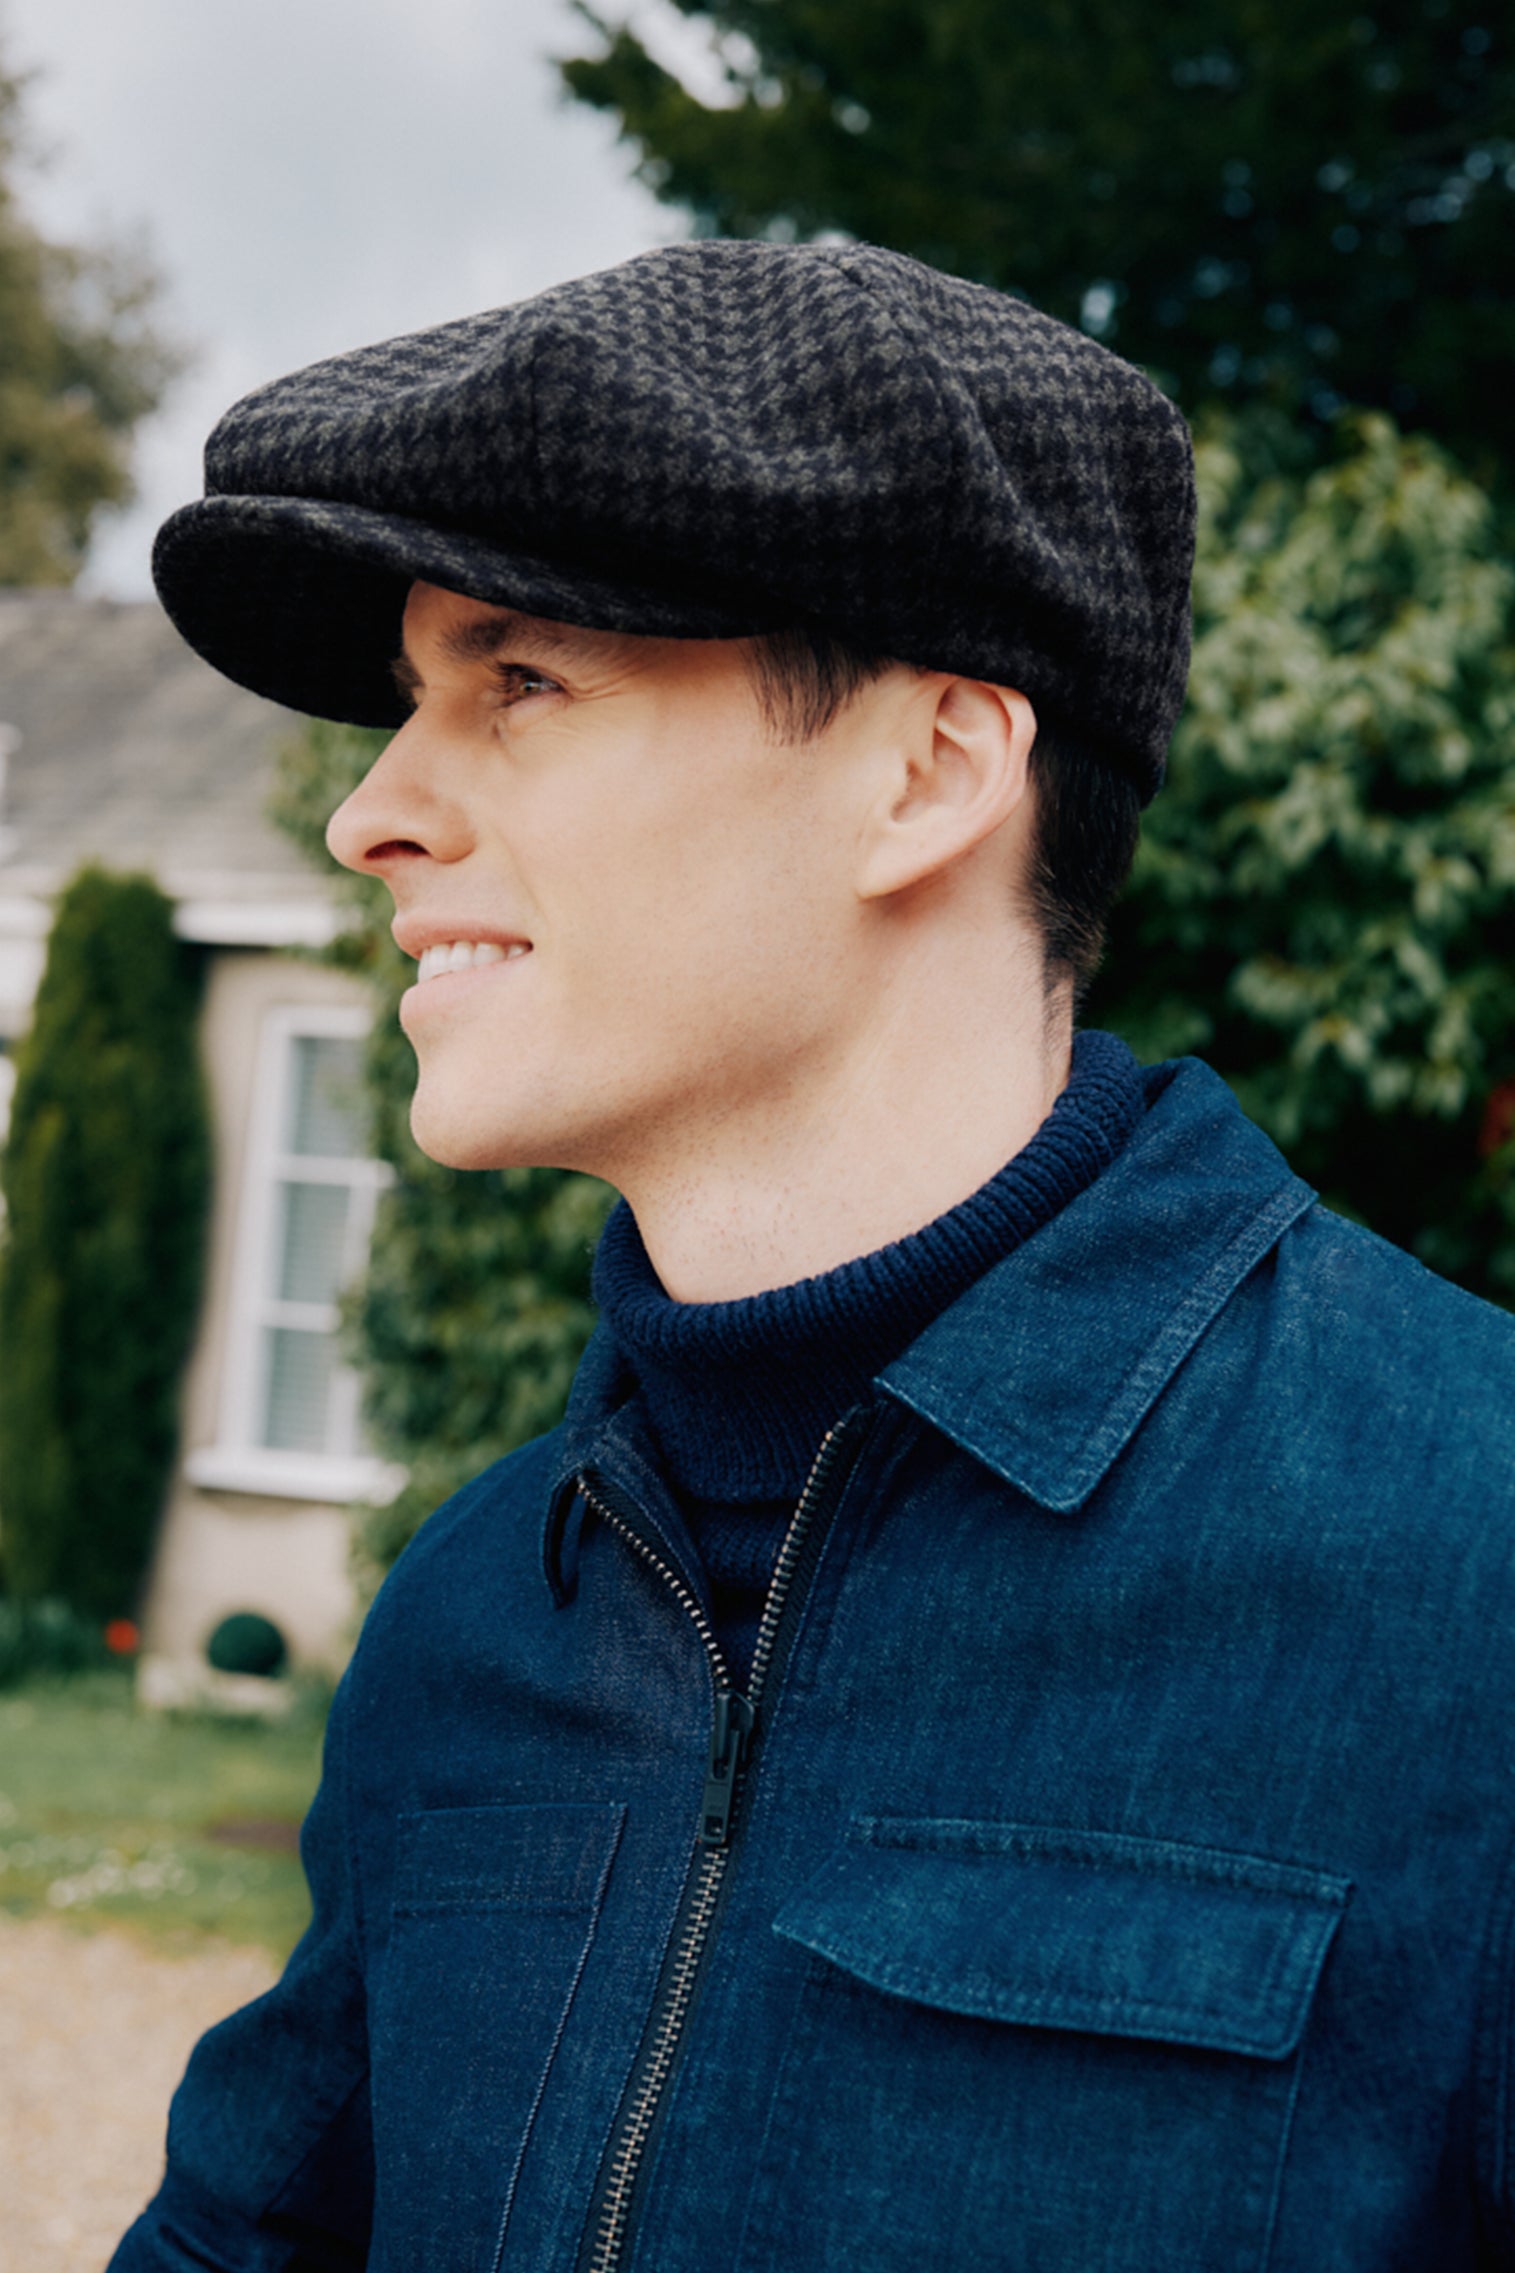 Sandwich Houndstooth Bakerboy Cap - Hats for Tall People - Lock & Co. Hatters London UK